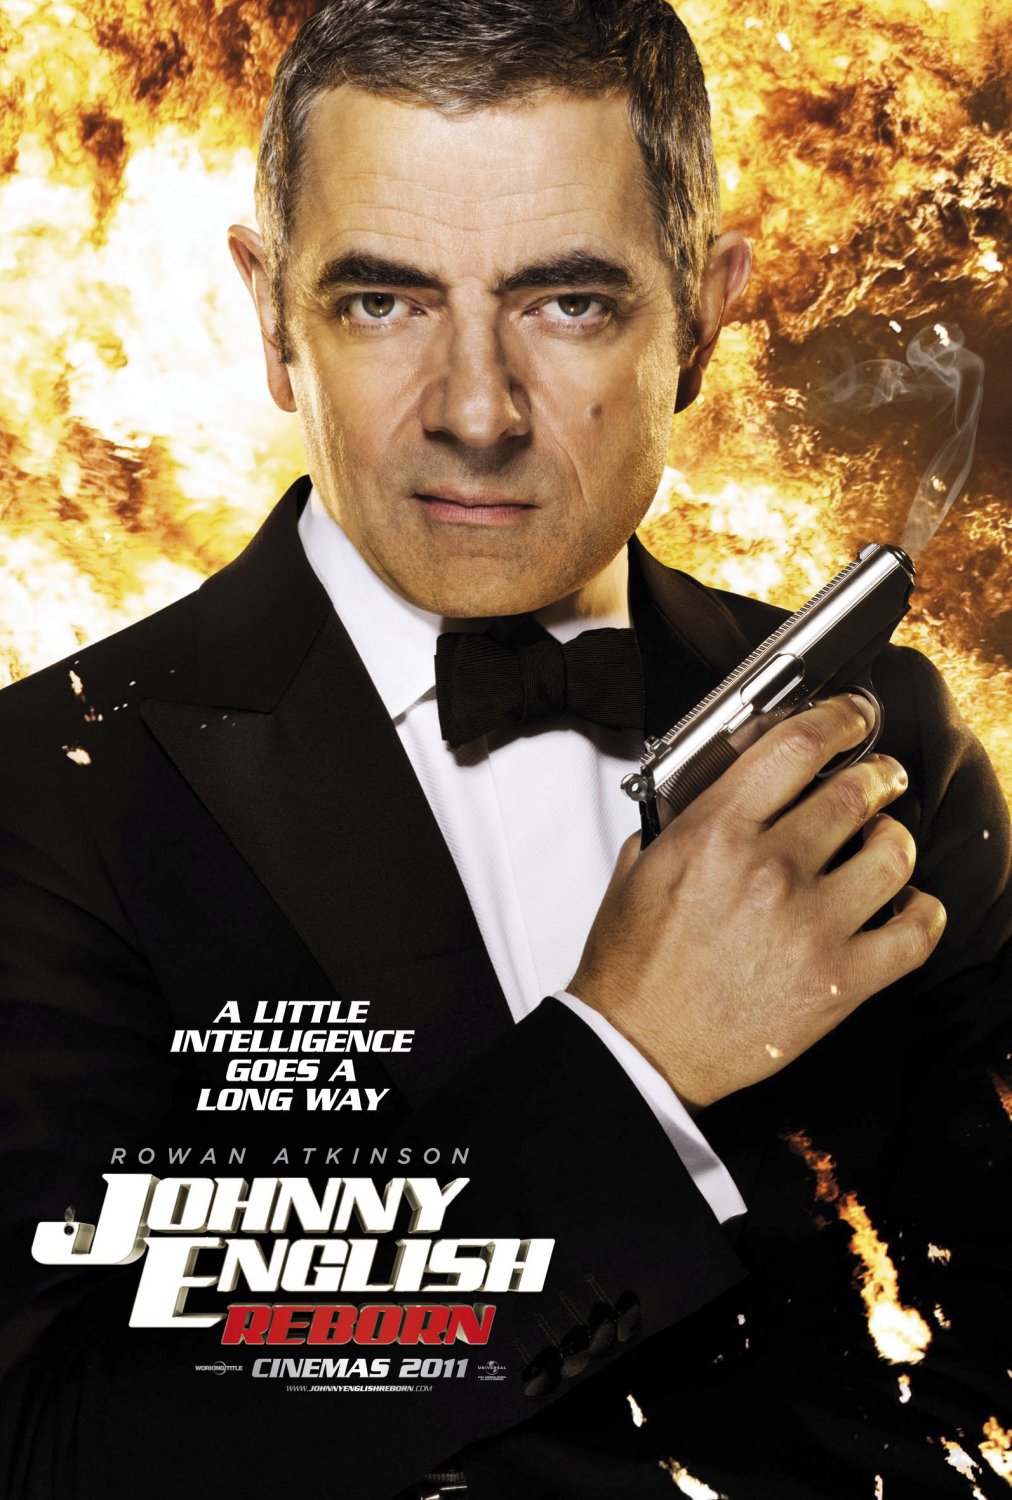 JOHNNY ENGLISH REBORN Opens October 21! Enter to Win Passes to the St